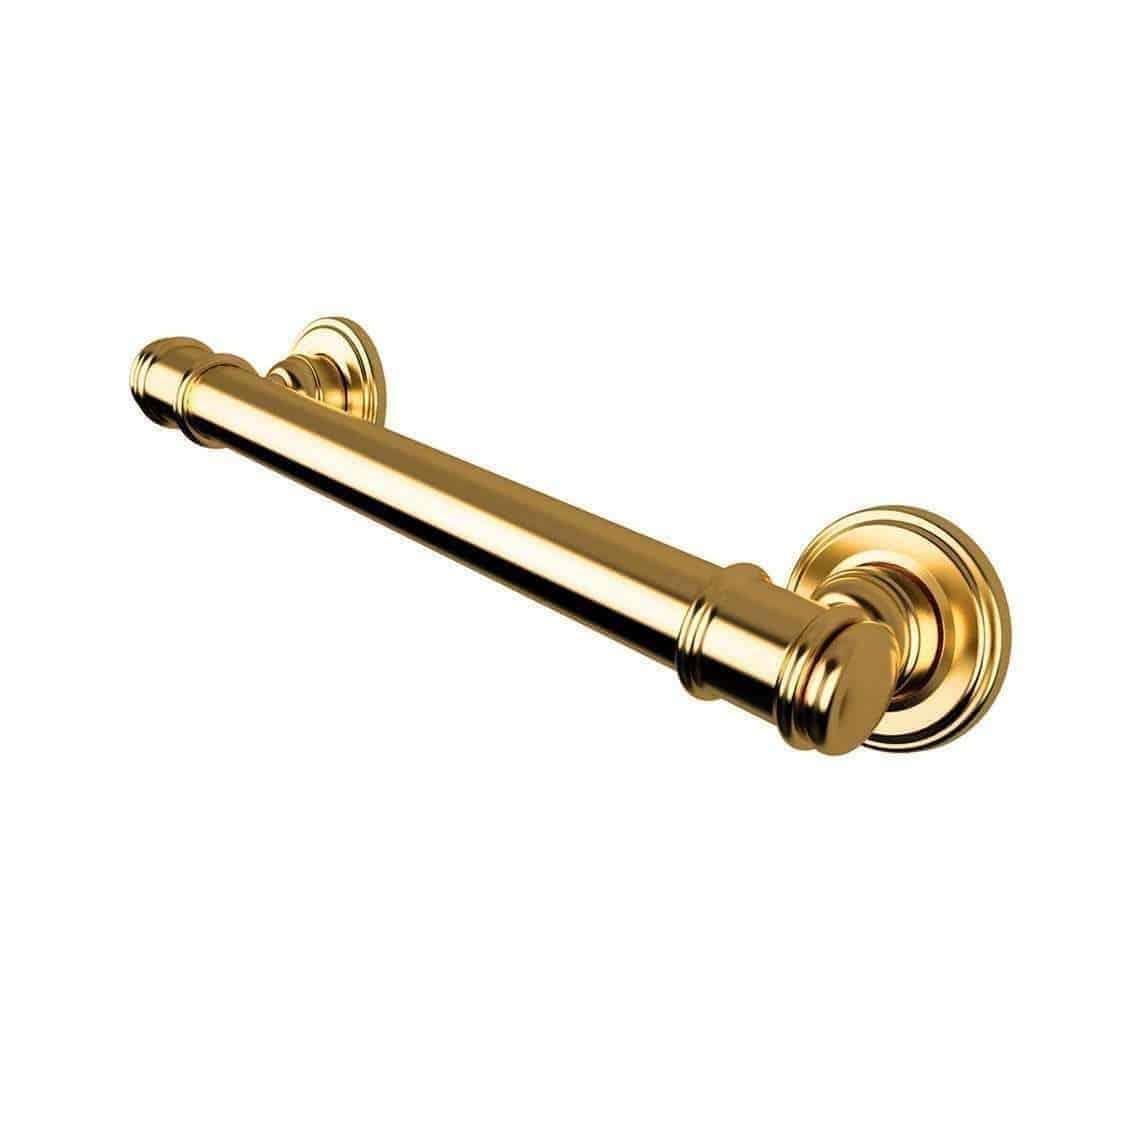 Availcare Glance Rail 450mm Gold - Burdens Plumbing